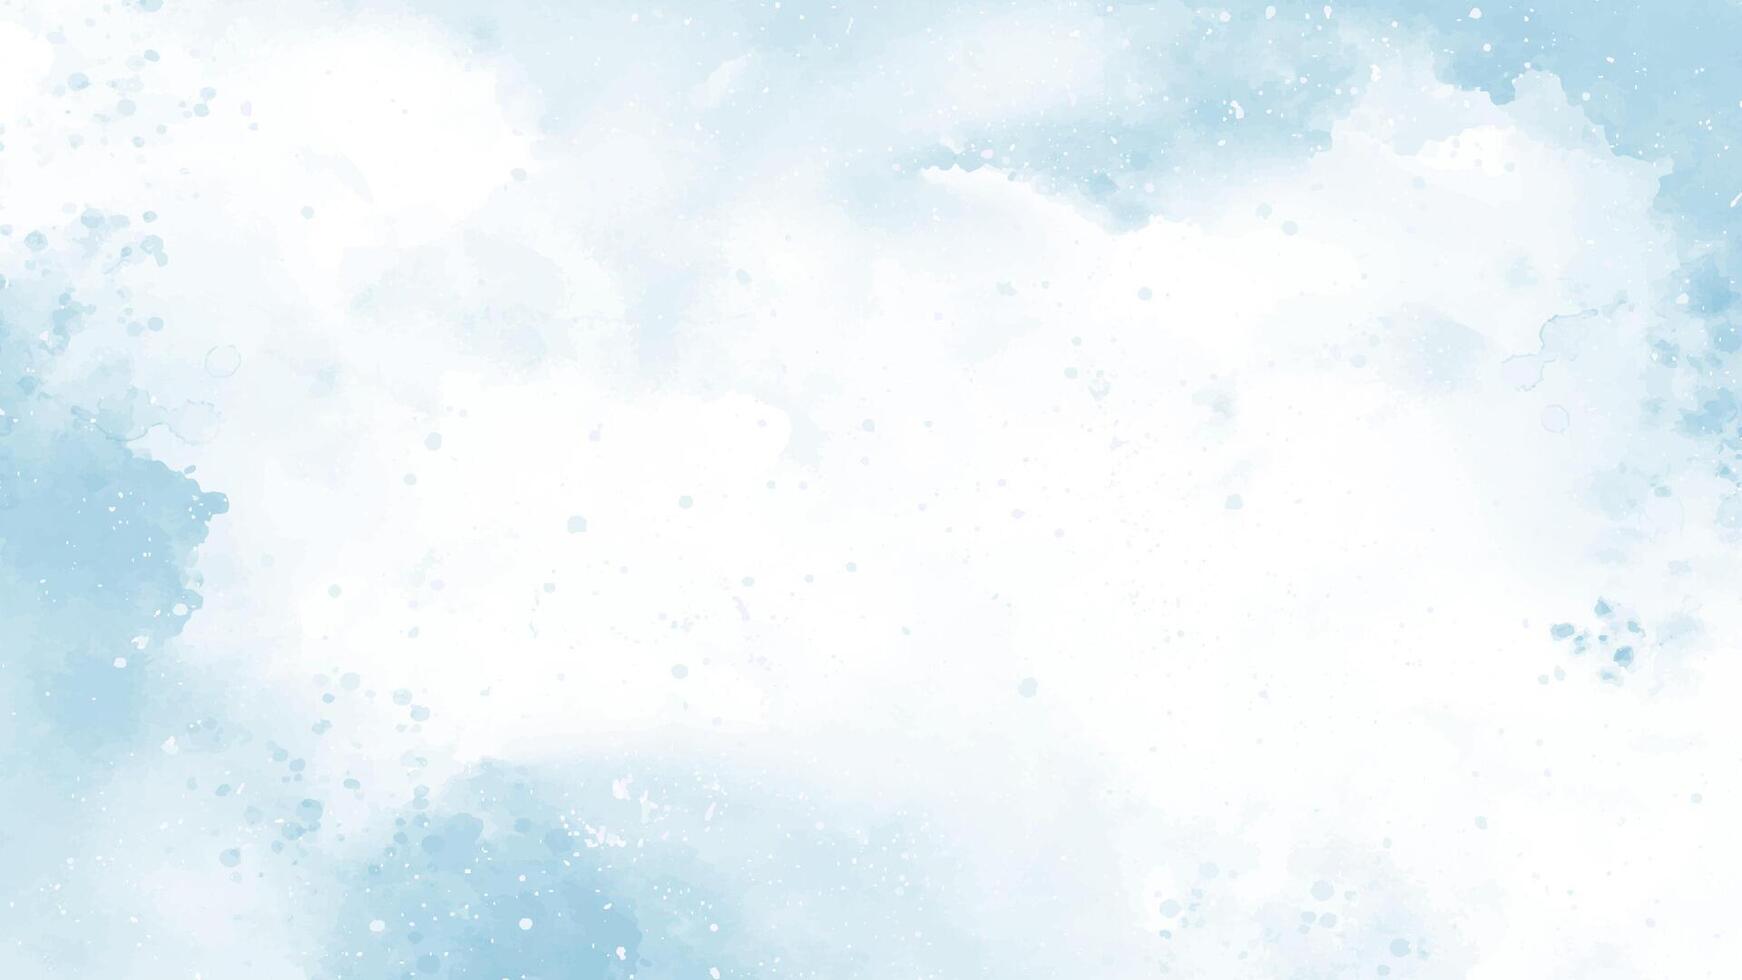 Abstract blue winter watercolor background. Sky pattern with snow vector